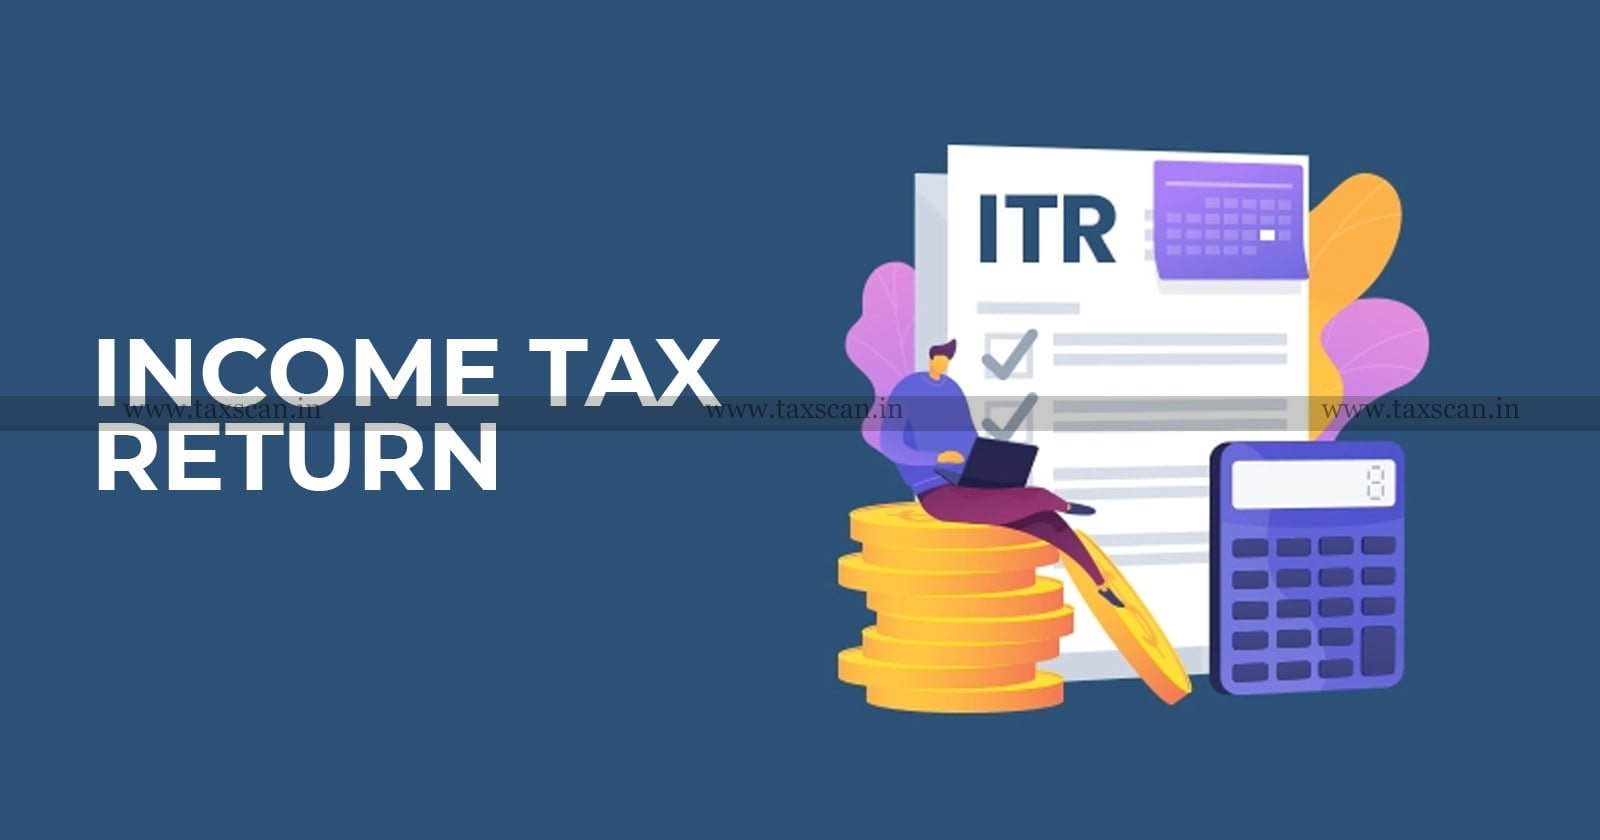 Rectification - ITR - Rectification of Mistakenly filed ITR by tax consultant - tax consultant - taxscan